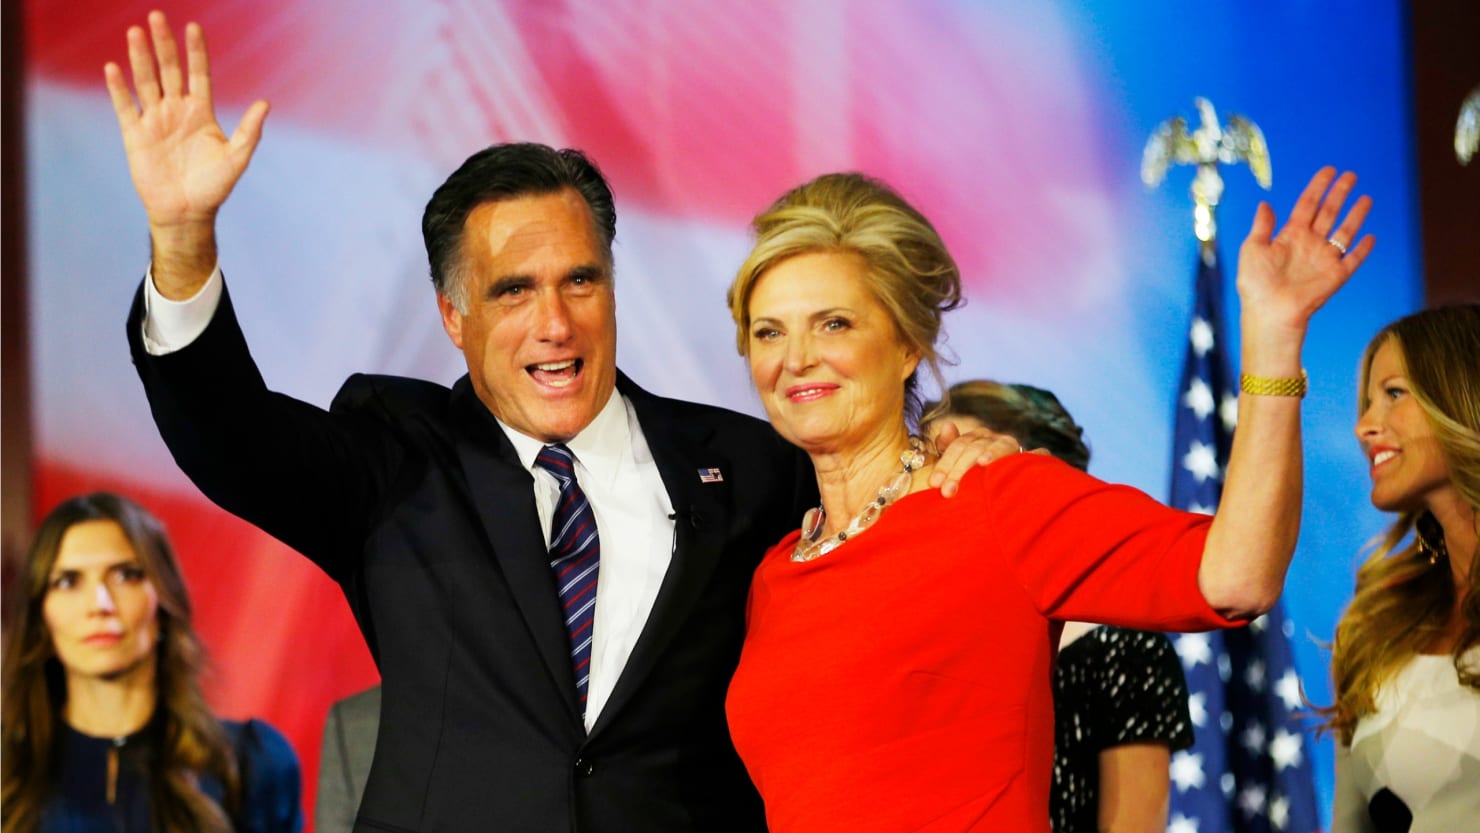 Mitt Romney Says He Voted for His Wife for President in 20161480 x 833